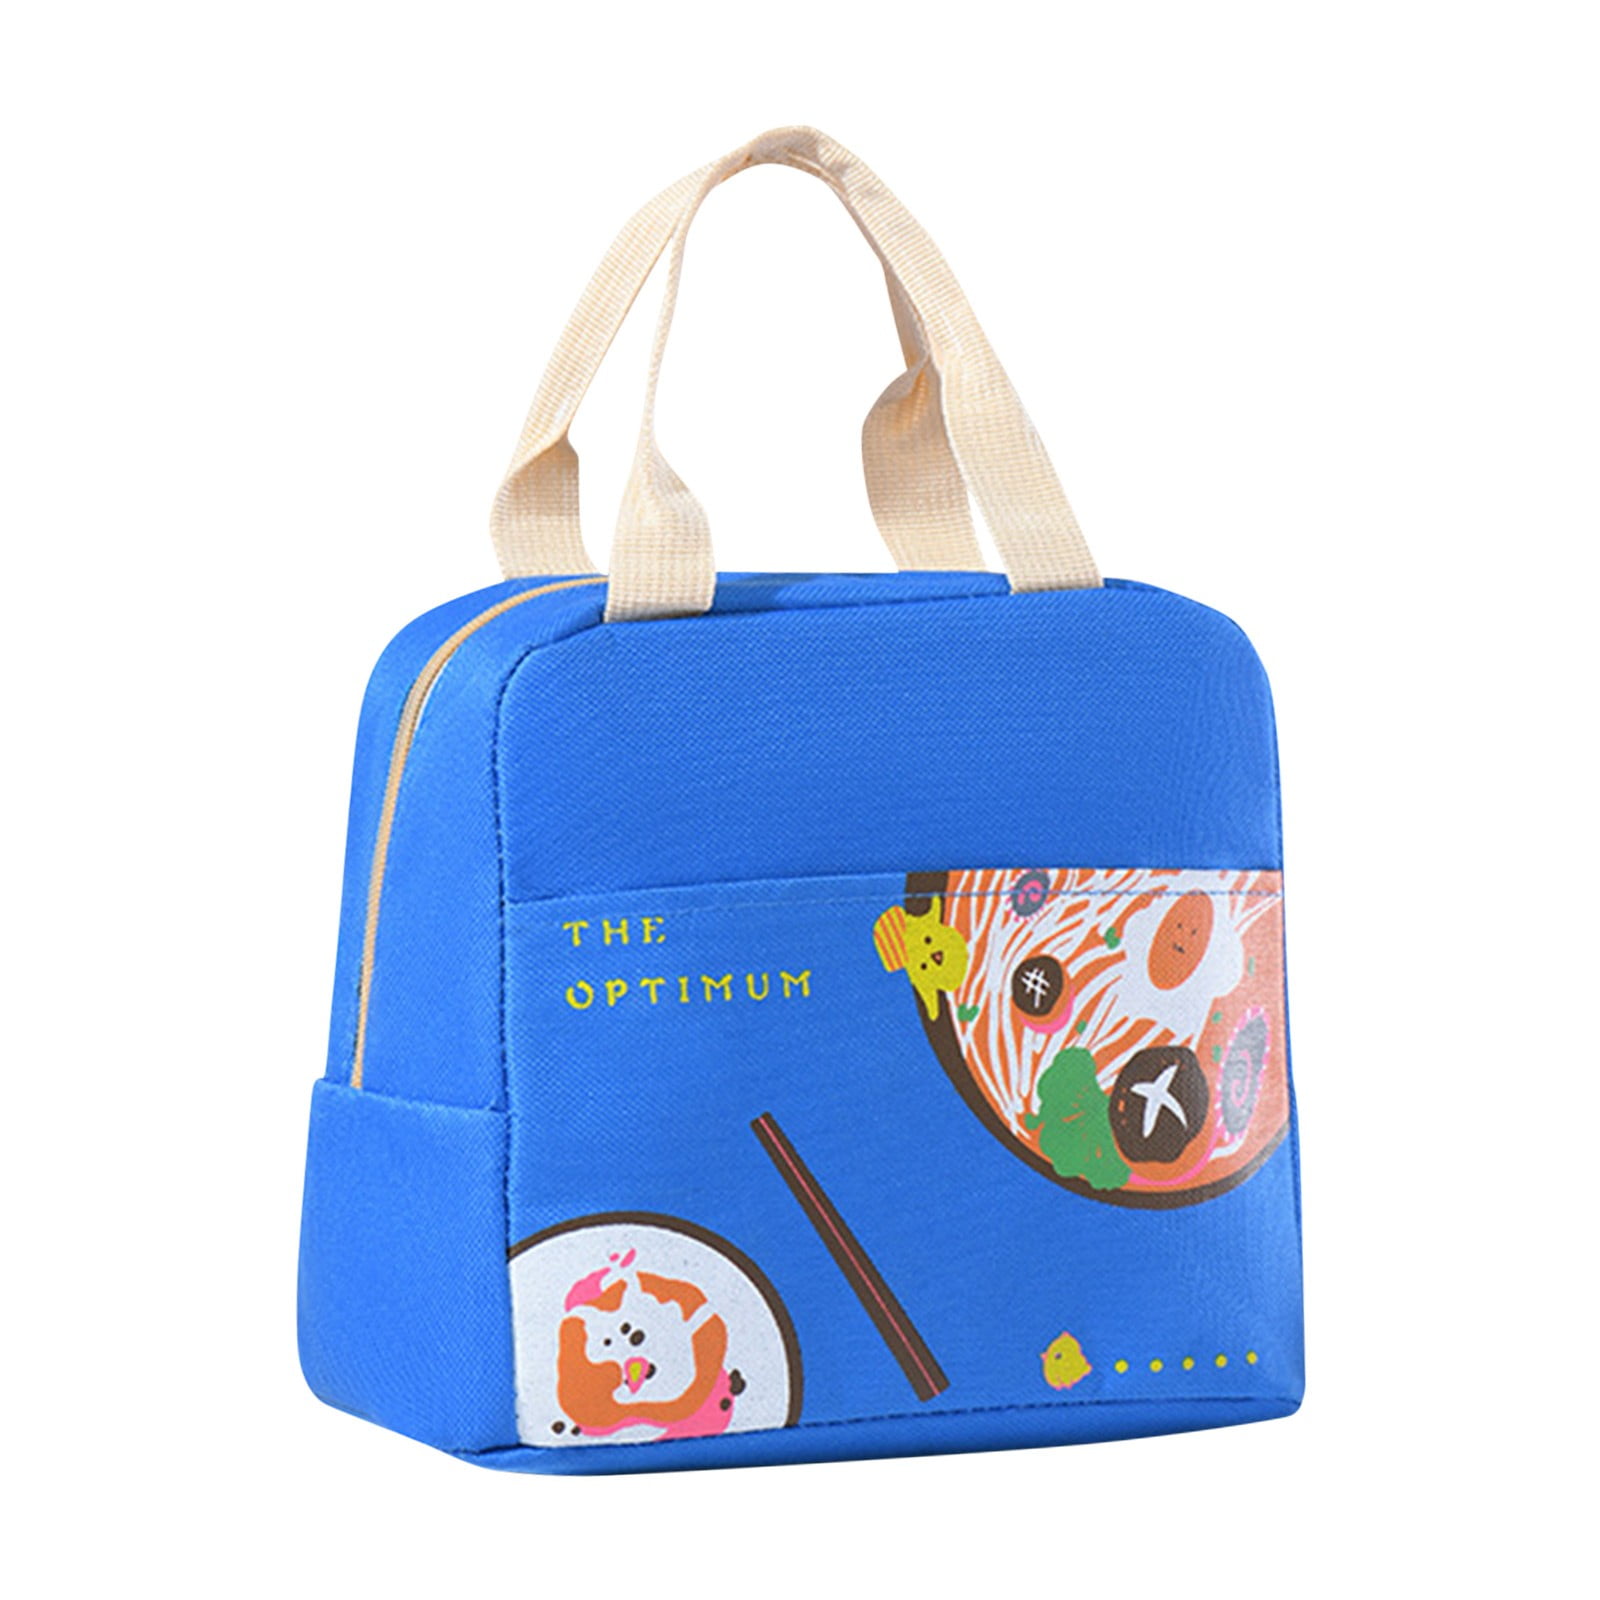 ZENMELE Fashioncartoon Lightweight Lunch Bag Insulated Bag Foldable ...